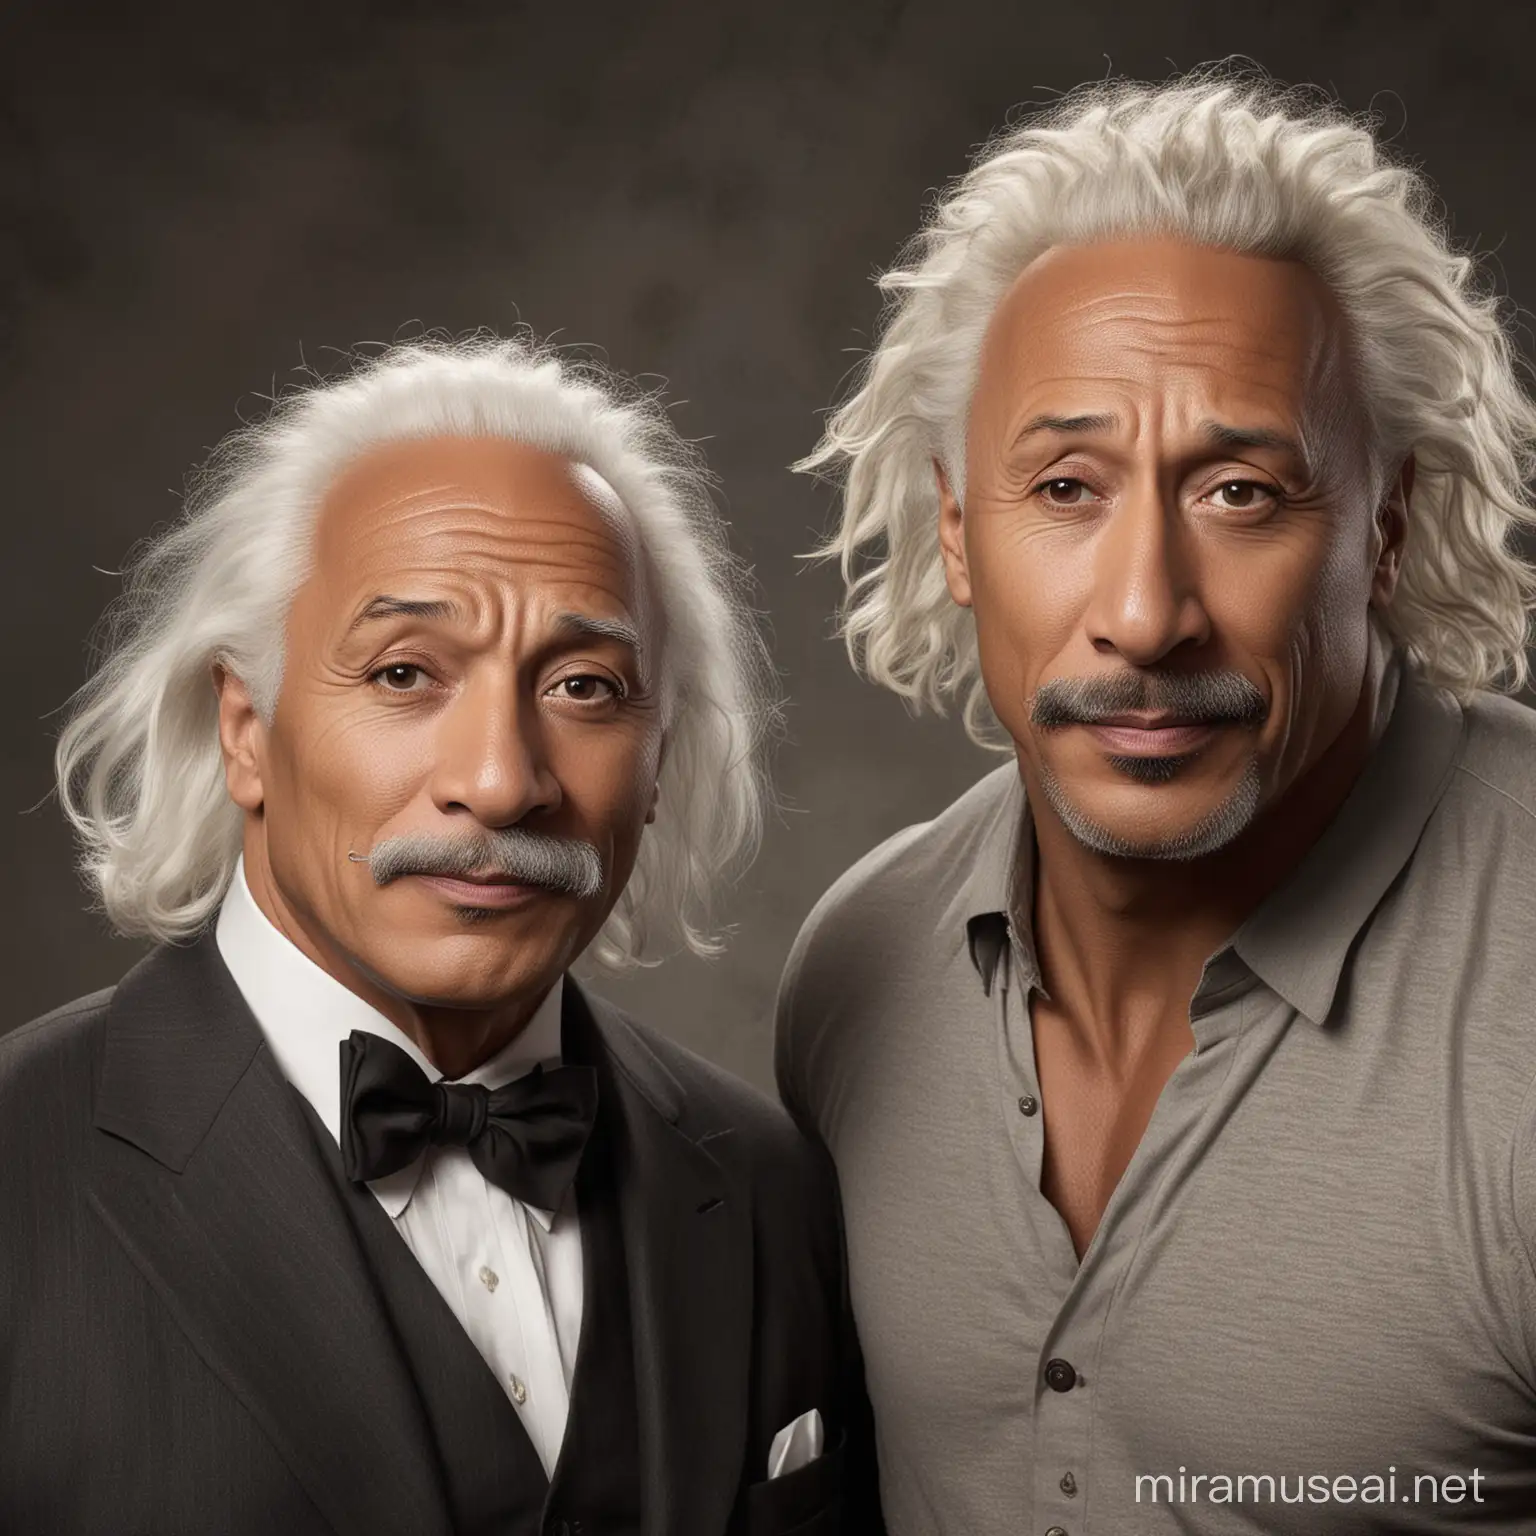 Einstein and Dwayne Johnson Engage in Intellectual and Physical Dialogue